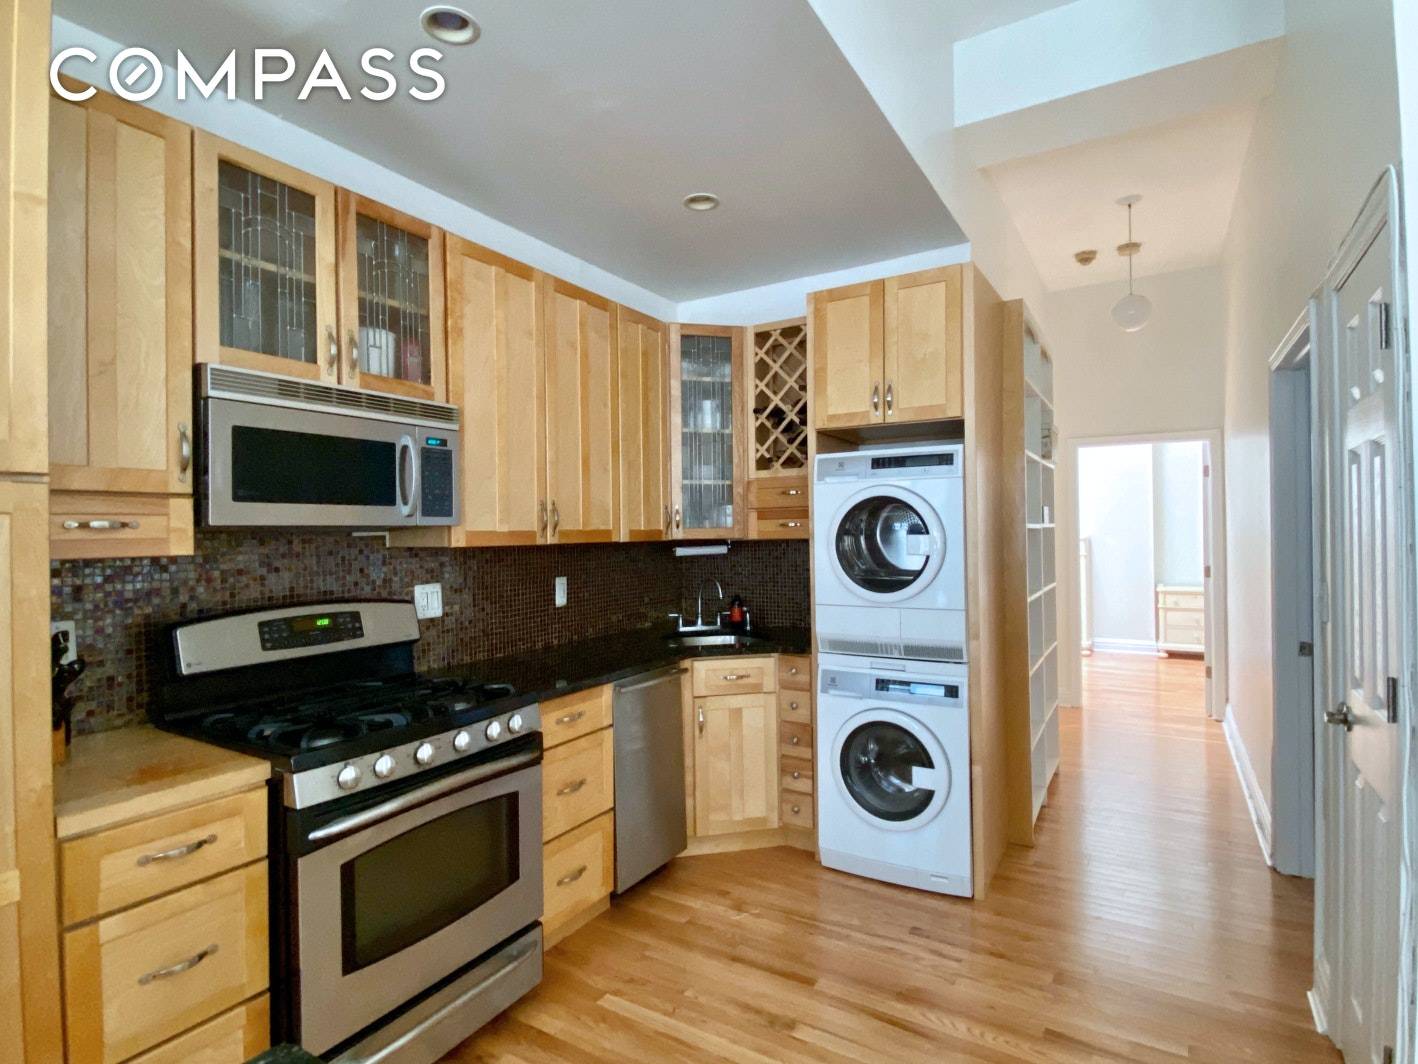 Location, space and low monthly fees for a Downtown Brooklyn Heights Condo ?